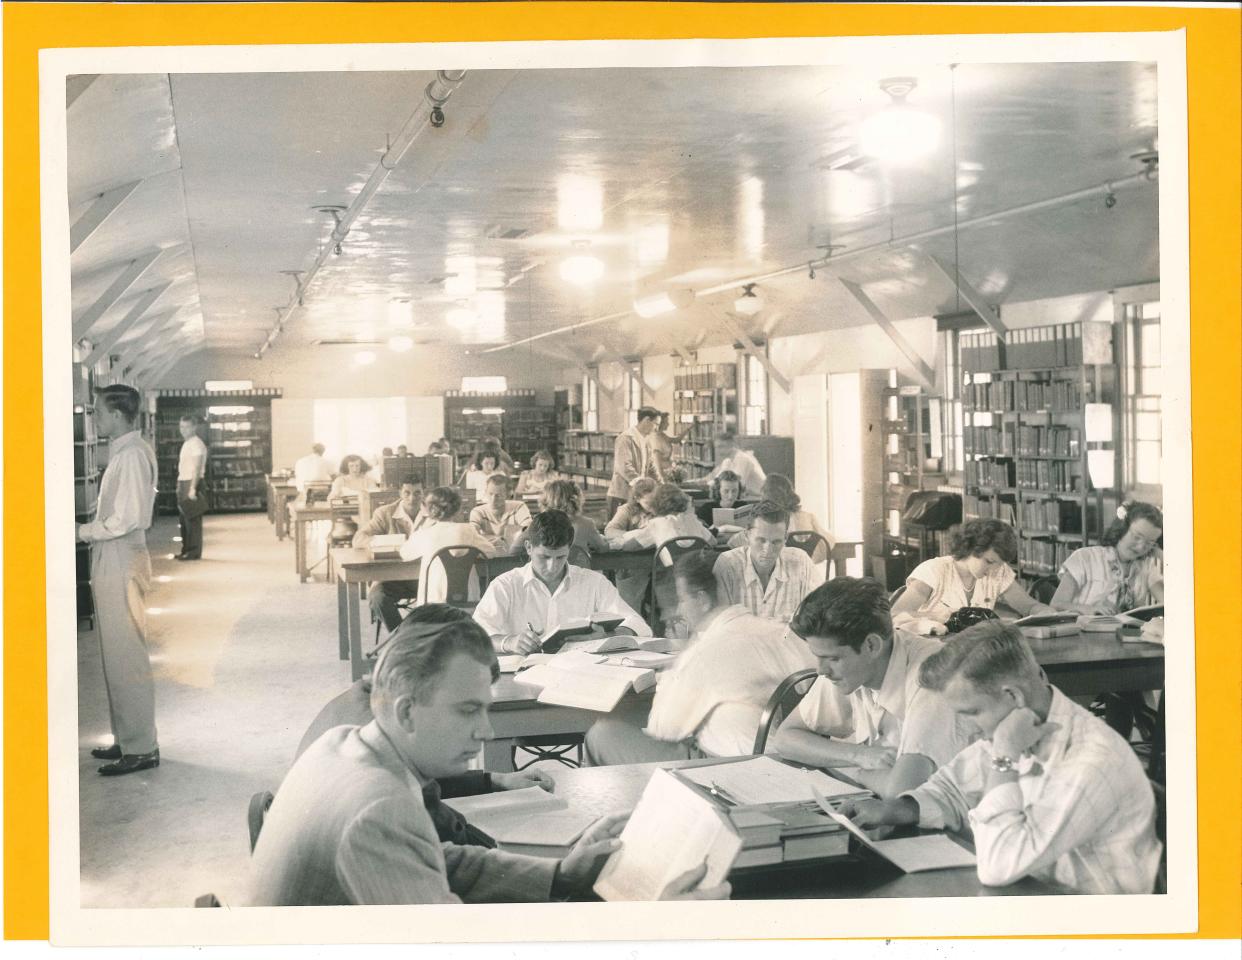 Students used an airplane hangar as a library after Palm Beach Junior College moved into Morrison Field, a deactivated Army-Air Force base, in the late 1940s.